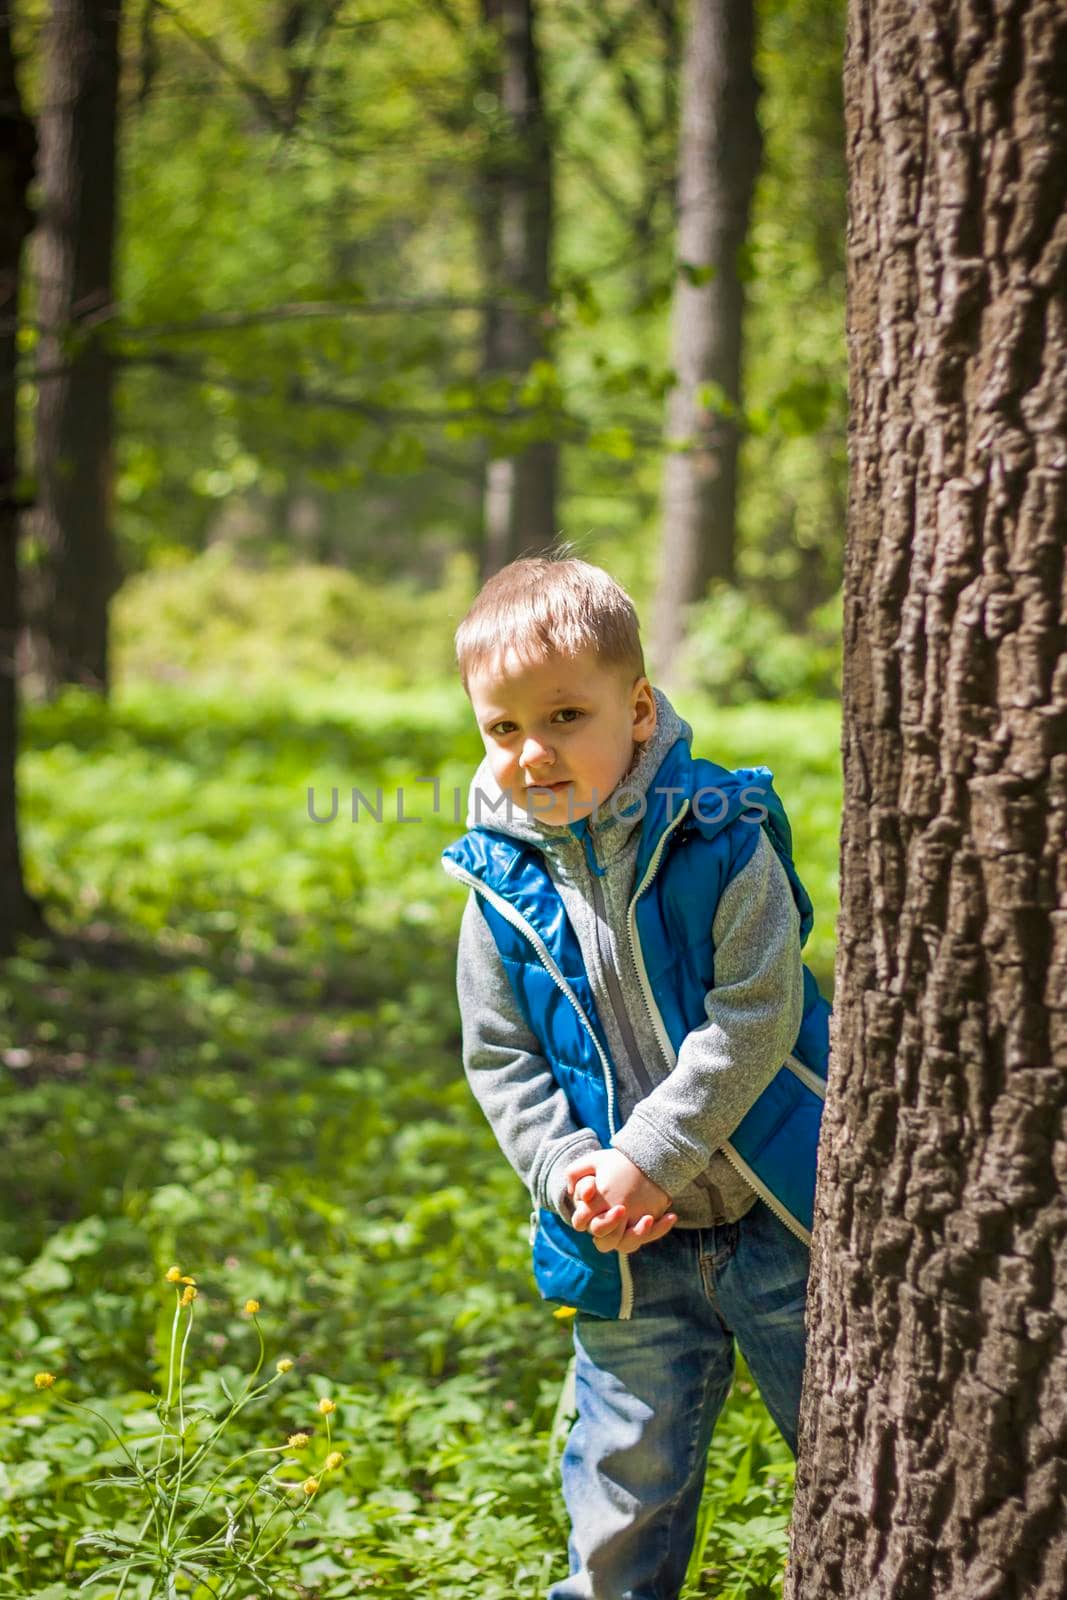 Portrait of a boy in a blue tank top in the woods in spring. Take a walk in the green park in the fresh air. The magical light from the sun's rays falls behind the boy. Spring